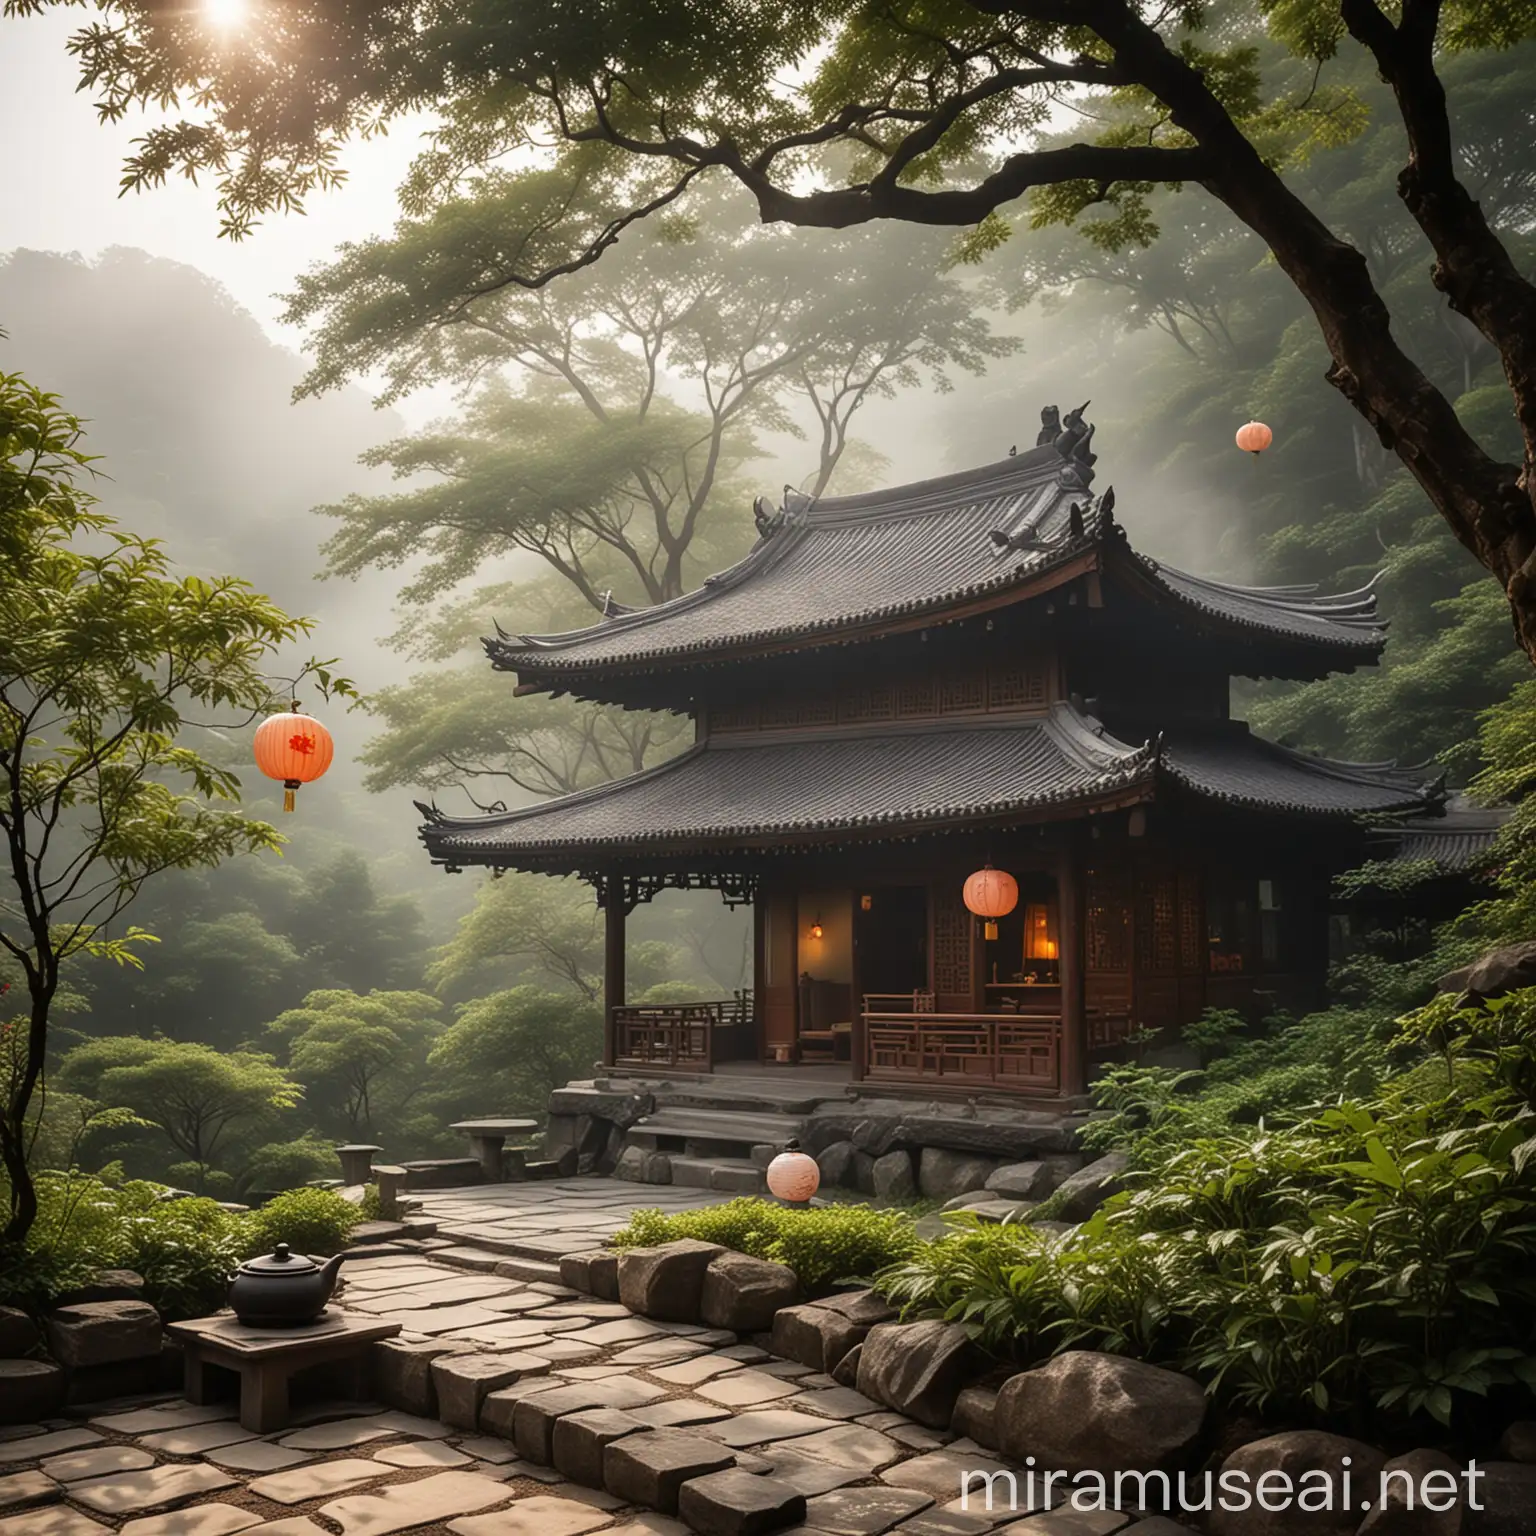 Tranquil Monk Brewing Tea in ChineseStyle Mountain Tea House